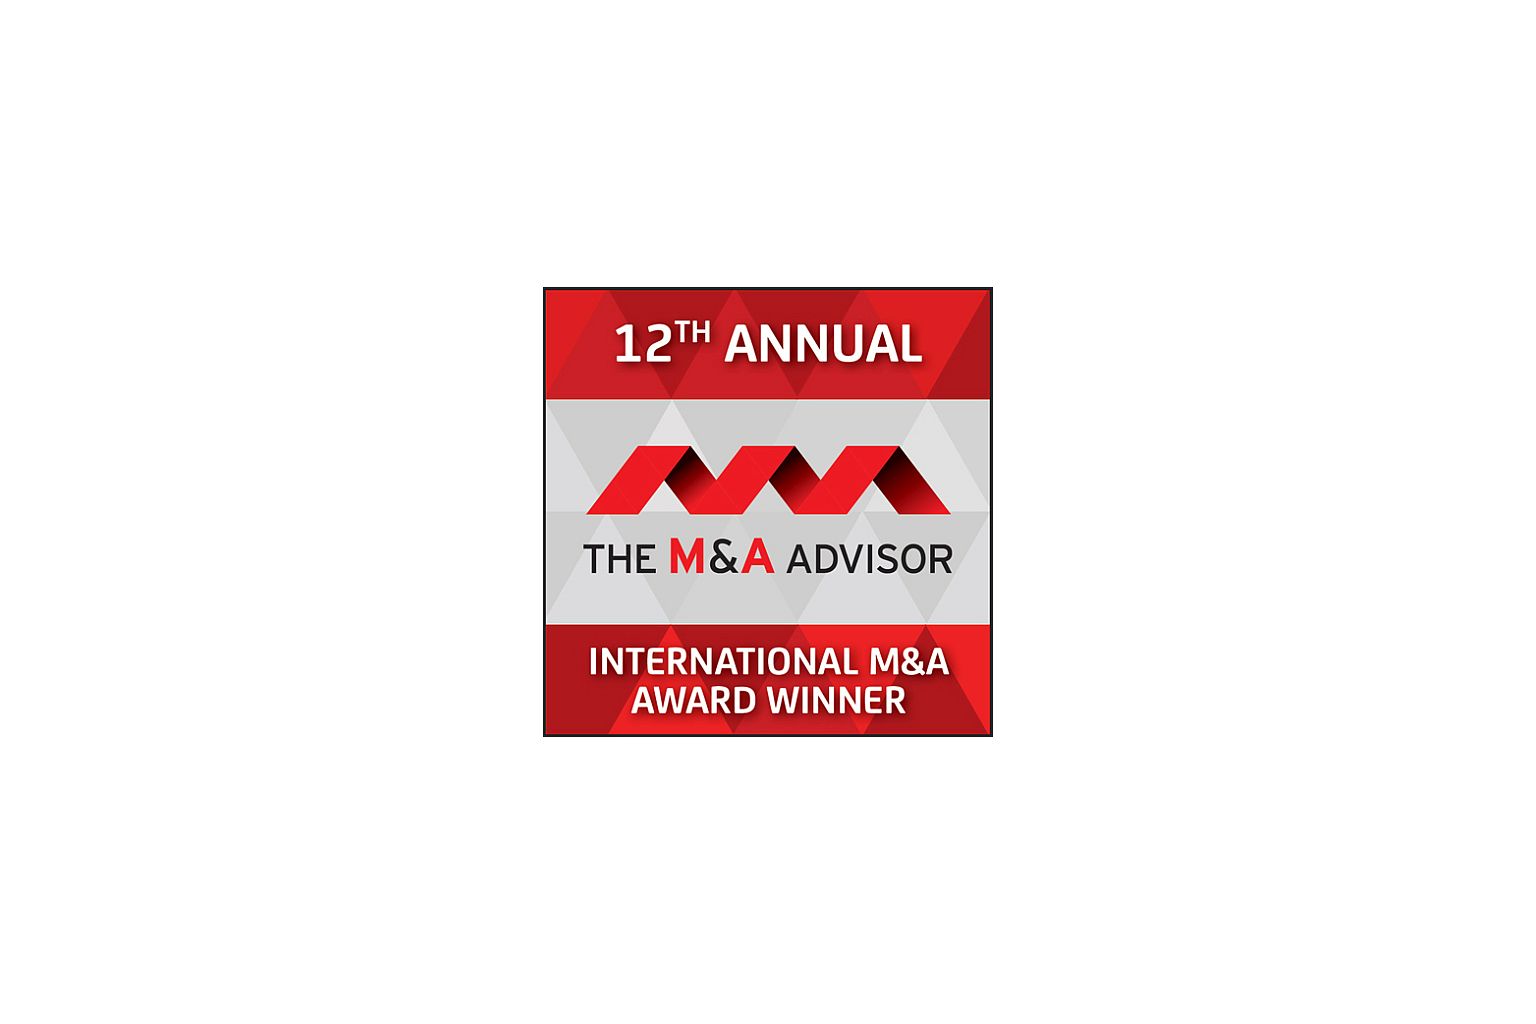 CT Corporation’s Global Services honored as Product/Service of the Year by International M&A Awards